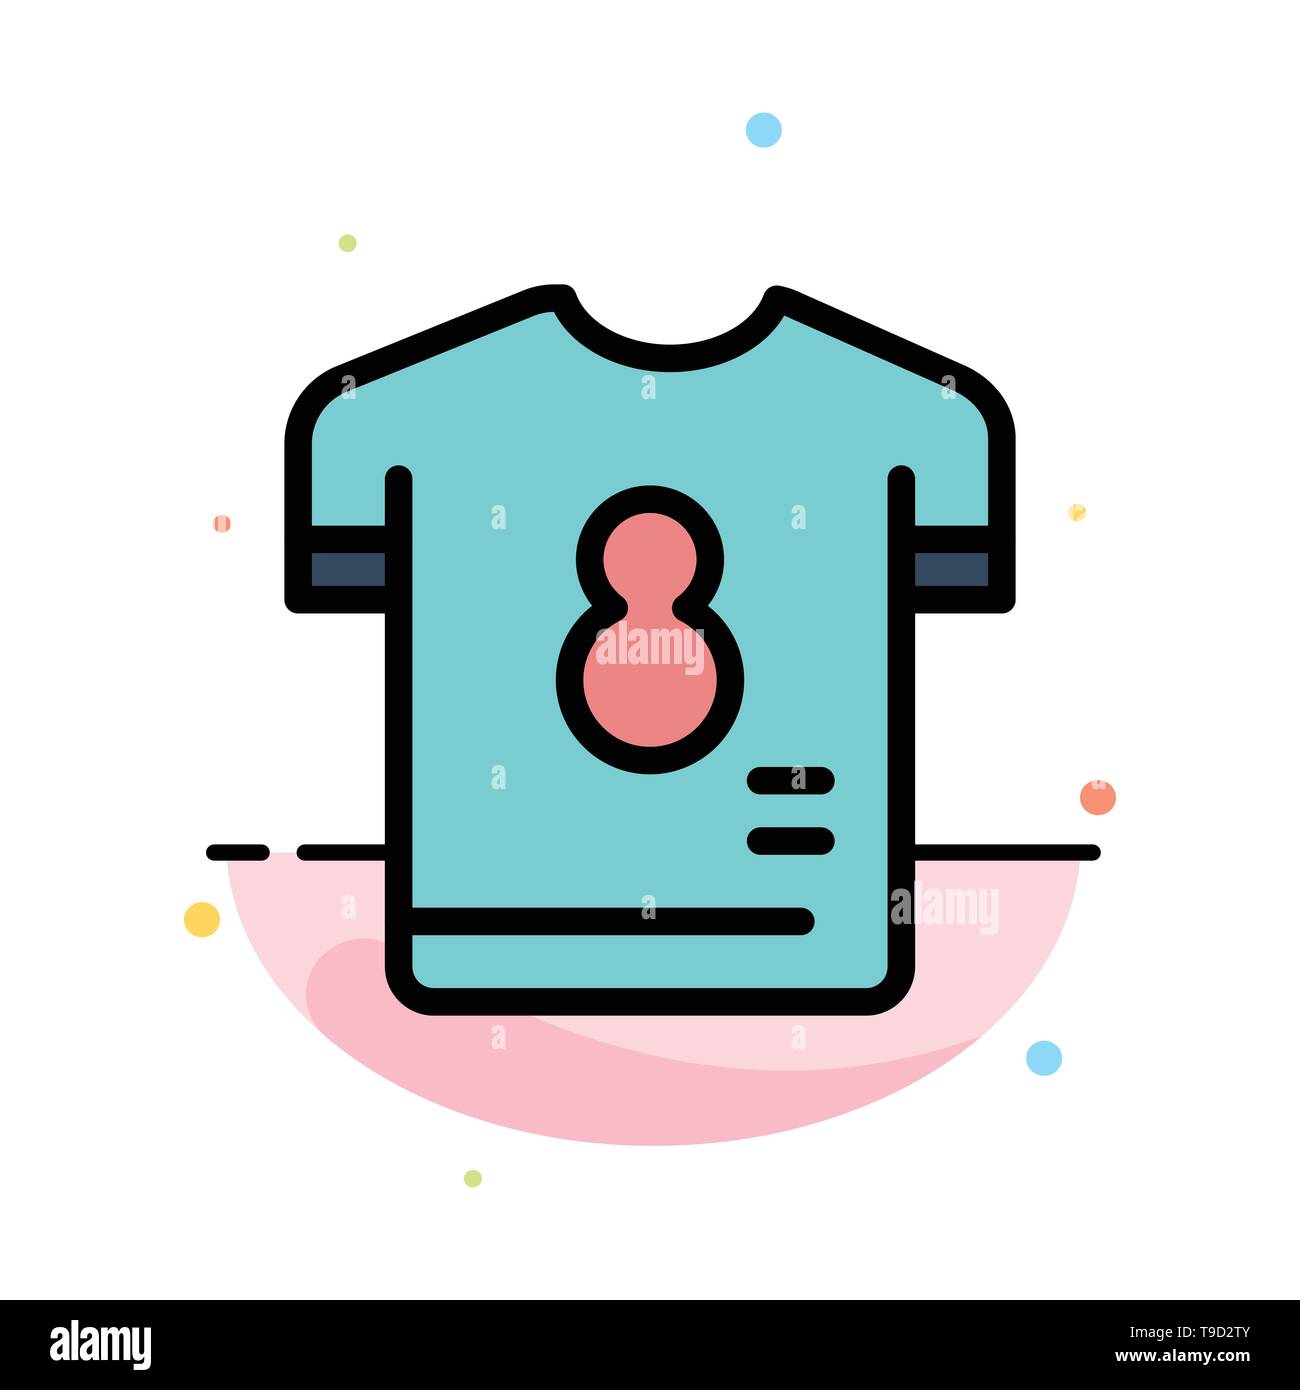 Football, Kit, Player, Shirt, Soccer Abstract Flat Color Icon Template Stock Vector